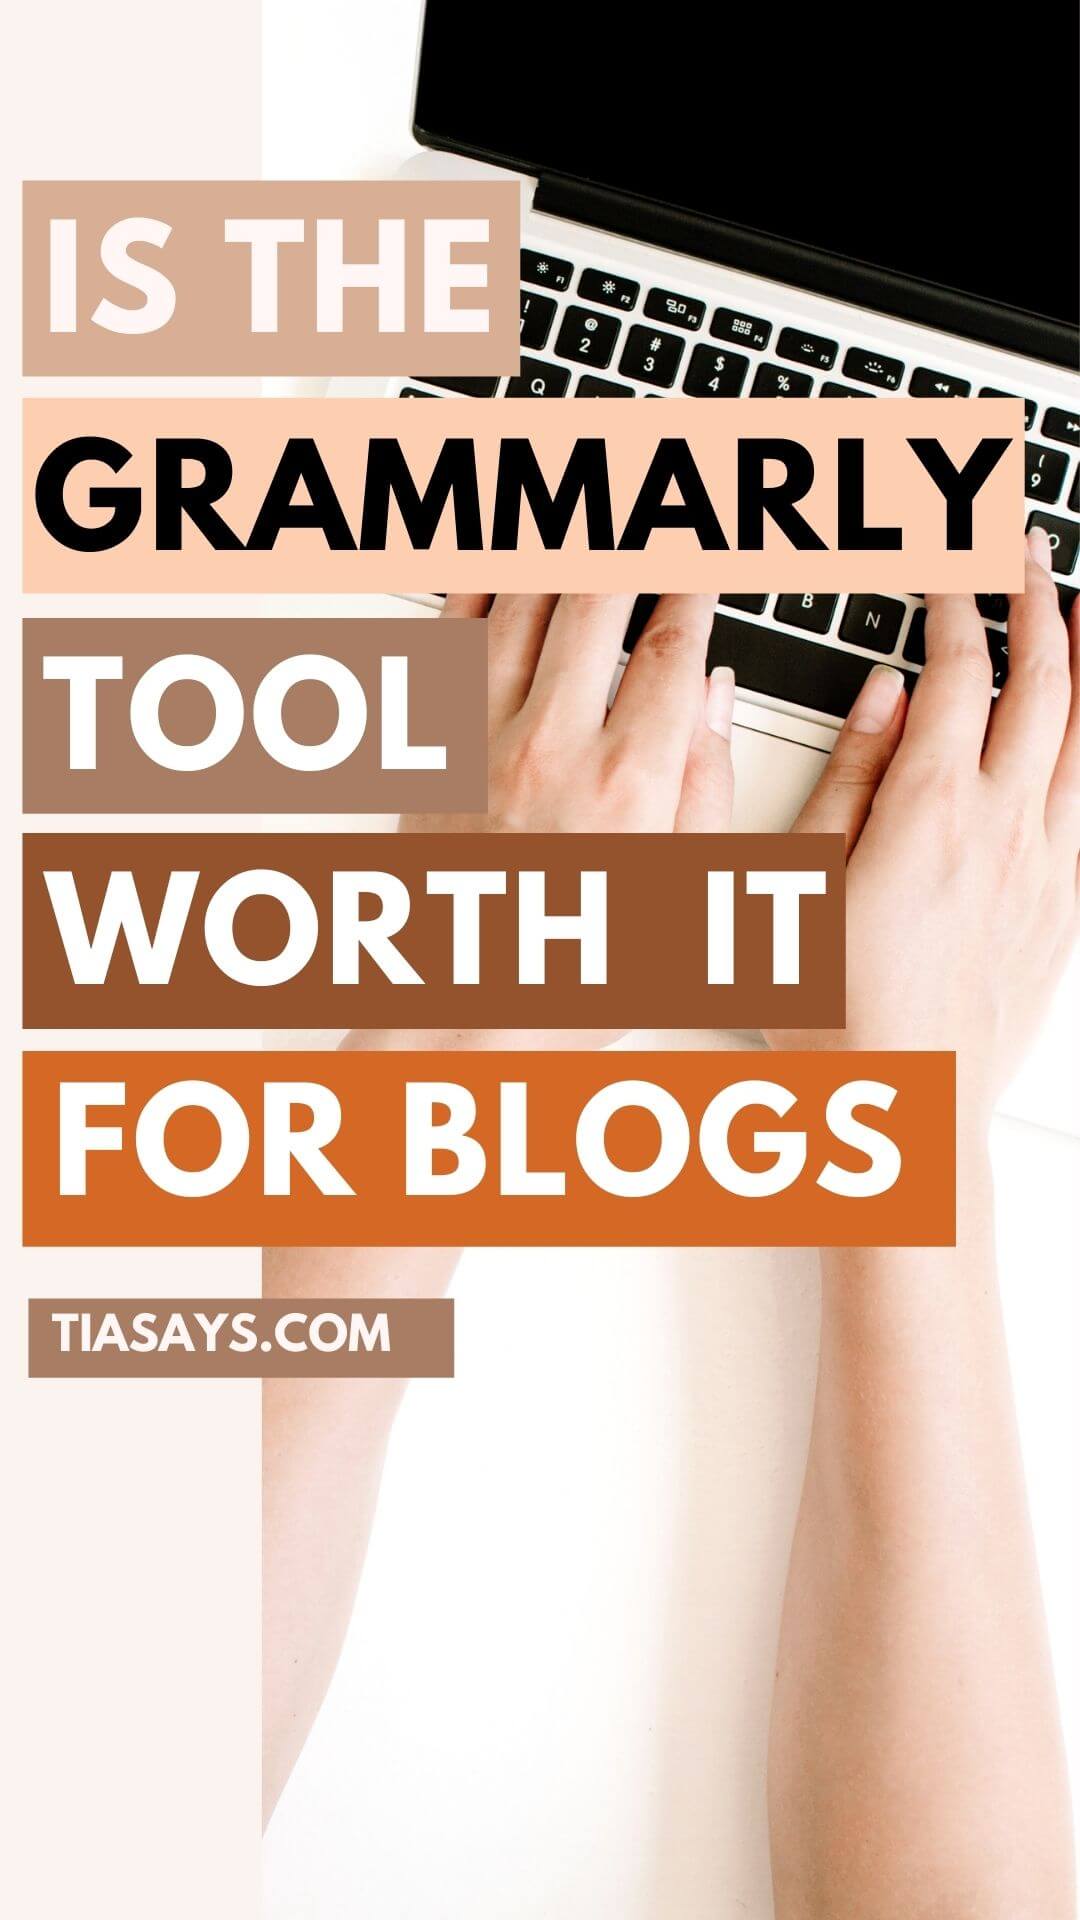 My honest grammarly review for bloggers